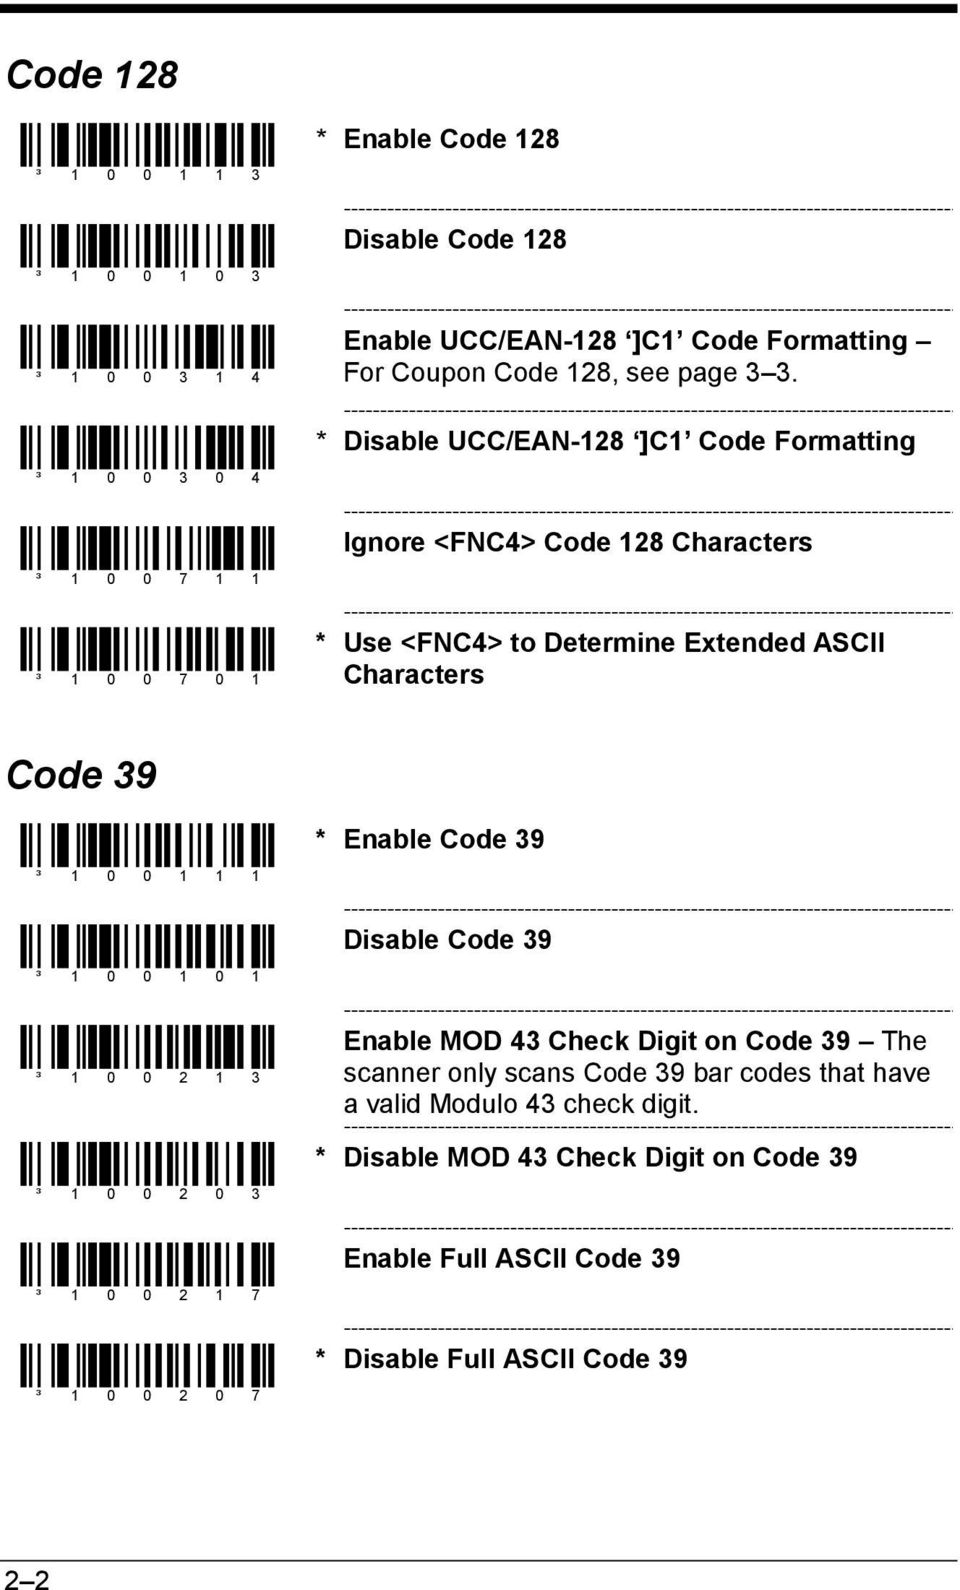 Characters Code 39 ³ 1 0 0 1 1 1 * Enable Code 39 ³ 1 0 0 1 0 1 Disable Code 39 ³ 1 0 0 2 1 3 ³ 1 0 0 2 0 3 Enable MOD 43 Check Digit on Code 39 The scanner only scans